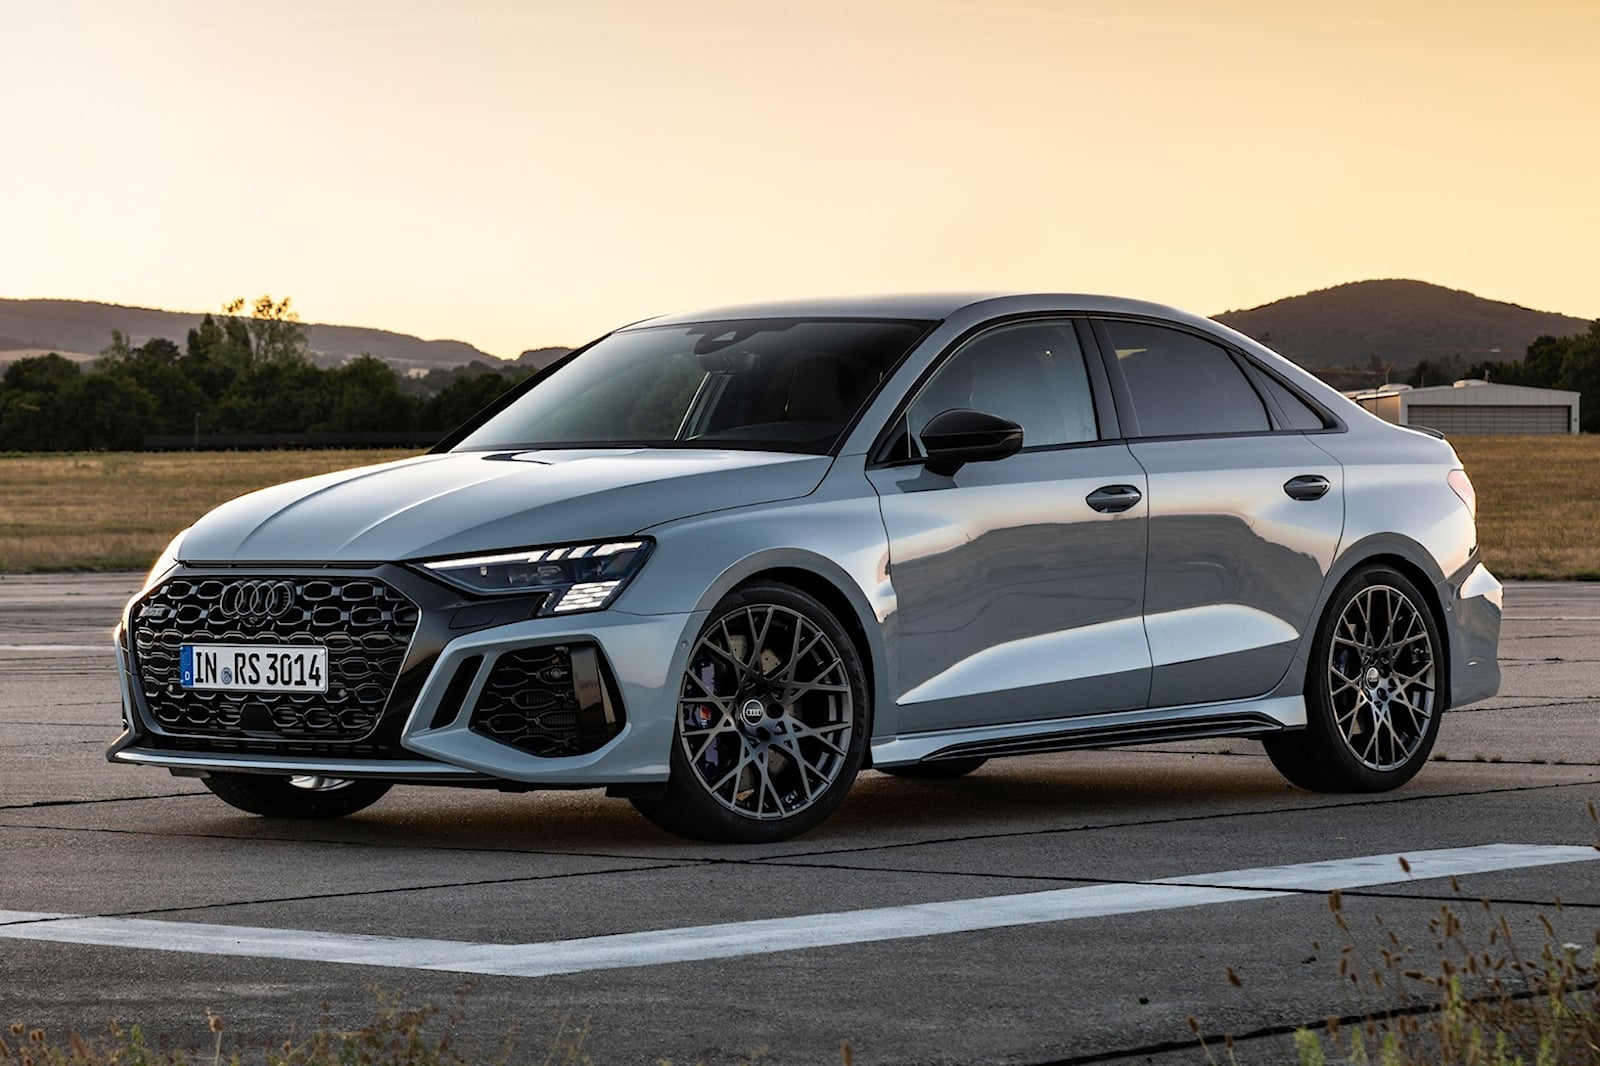 2023 Audi RS3 Performance Revealed With 401 HP And 186 MPH Top Speed